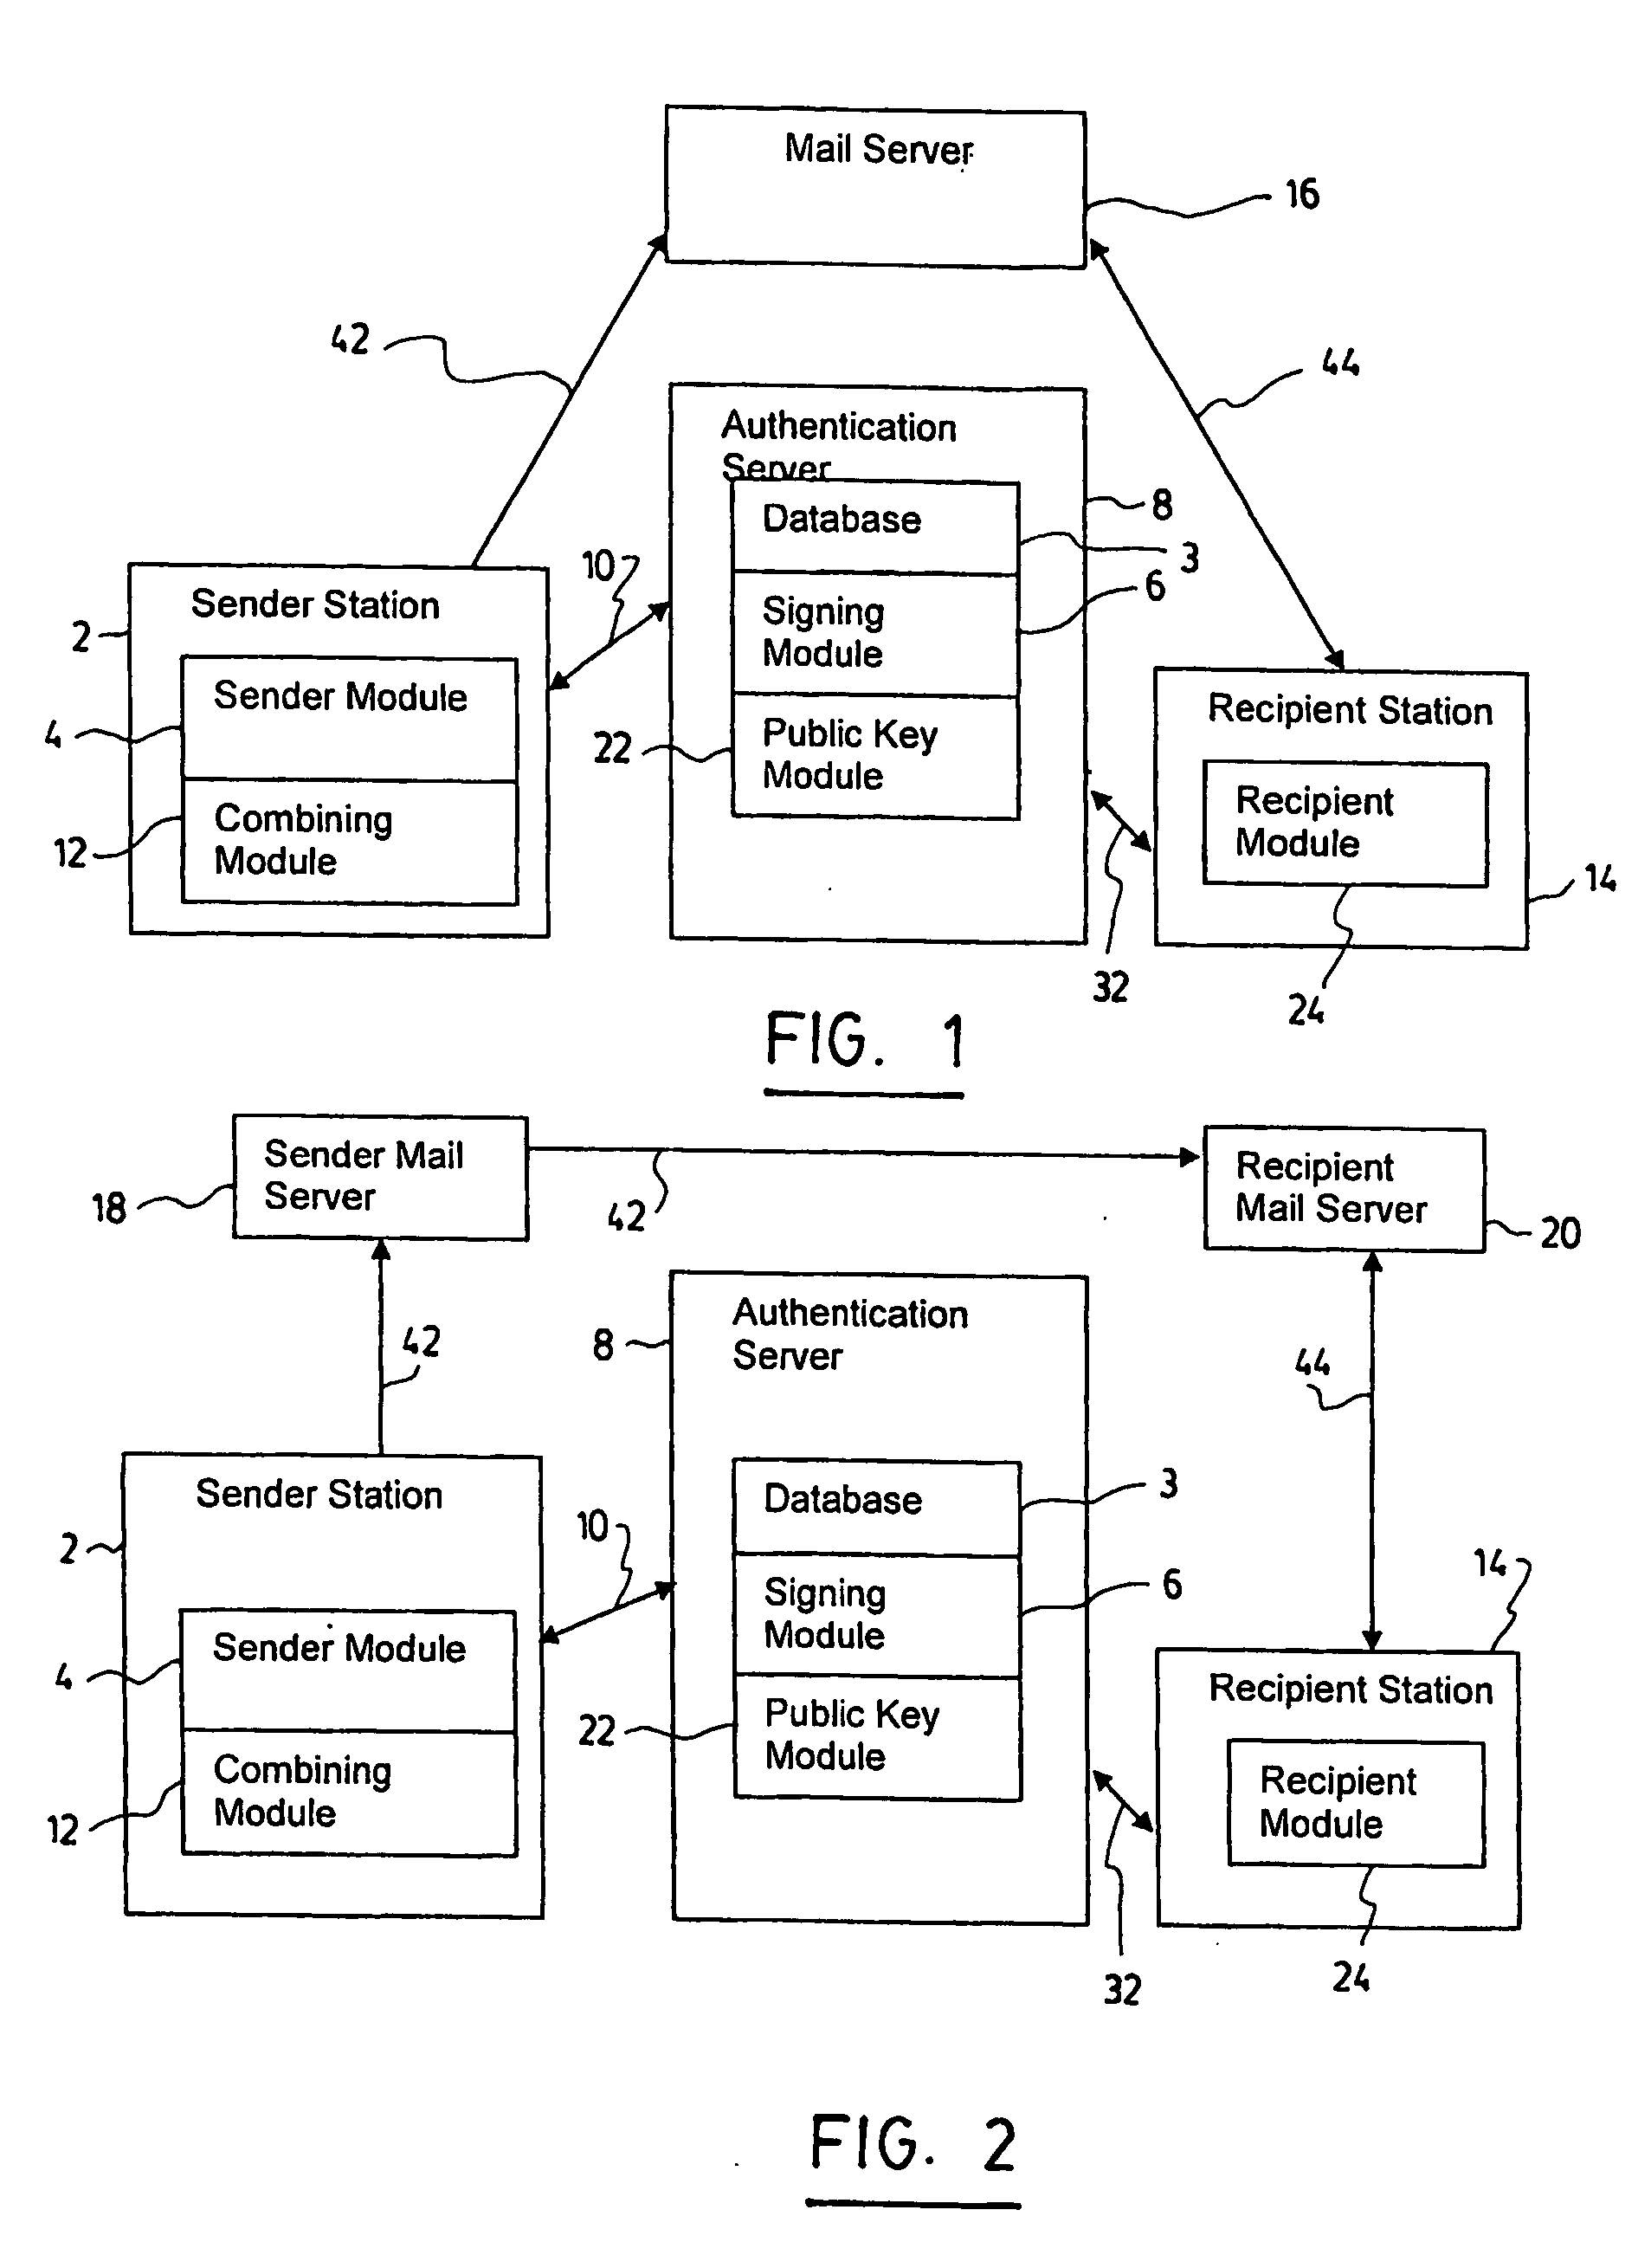 System and method for warranting electronic mail using a hybrid public key encryption scheme